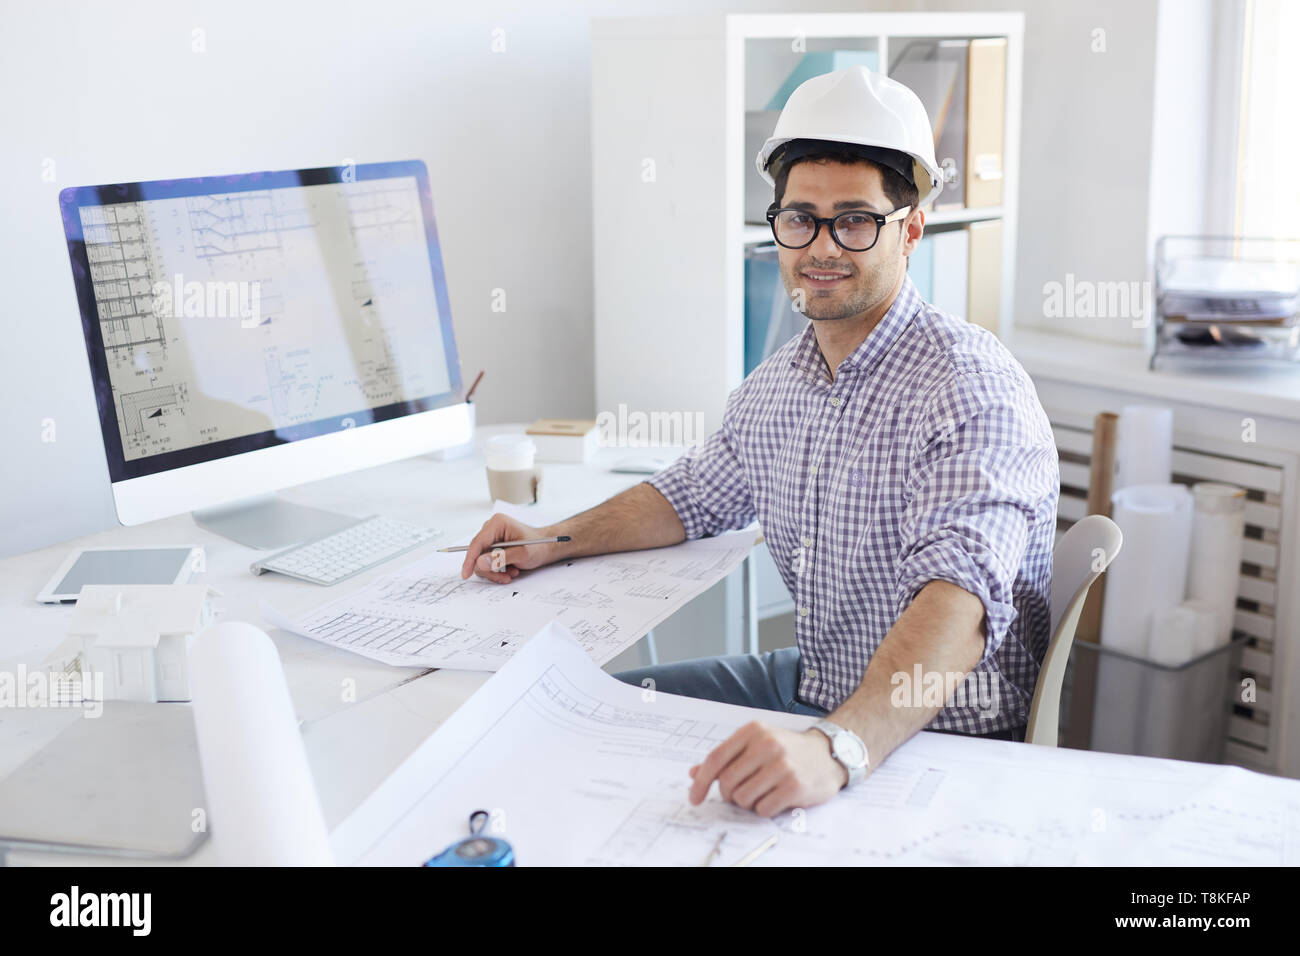 Smiling Engineer Posing at Workplace Stock Photo